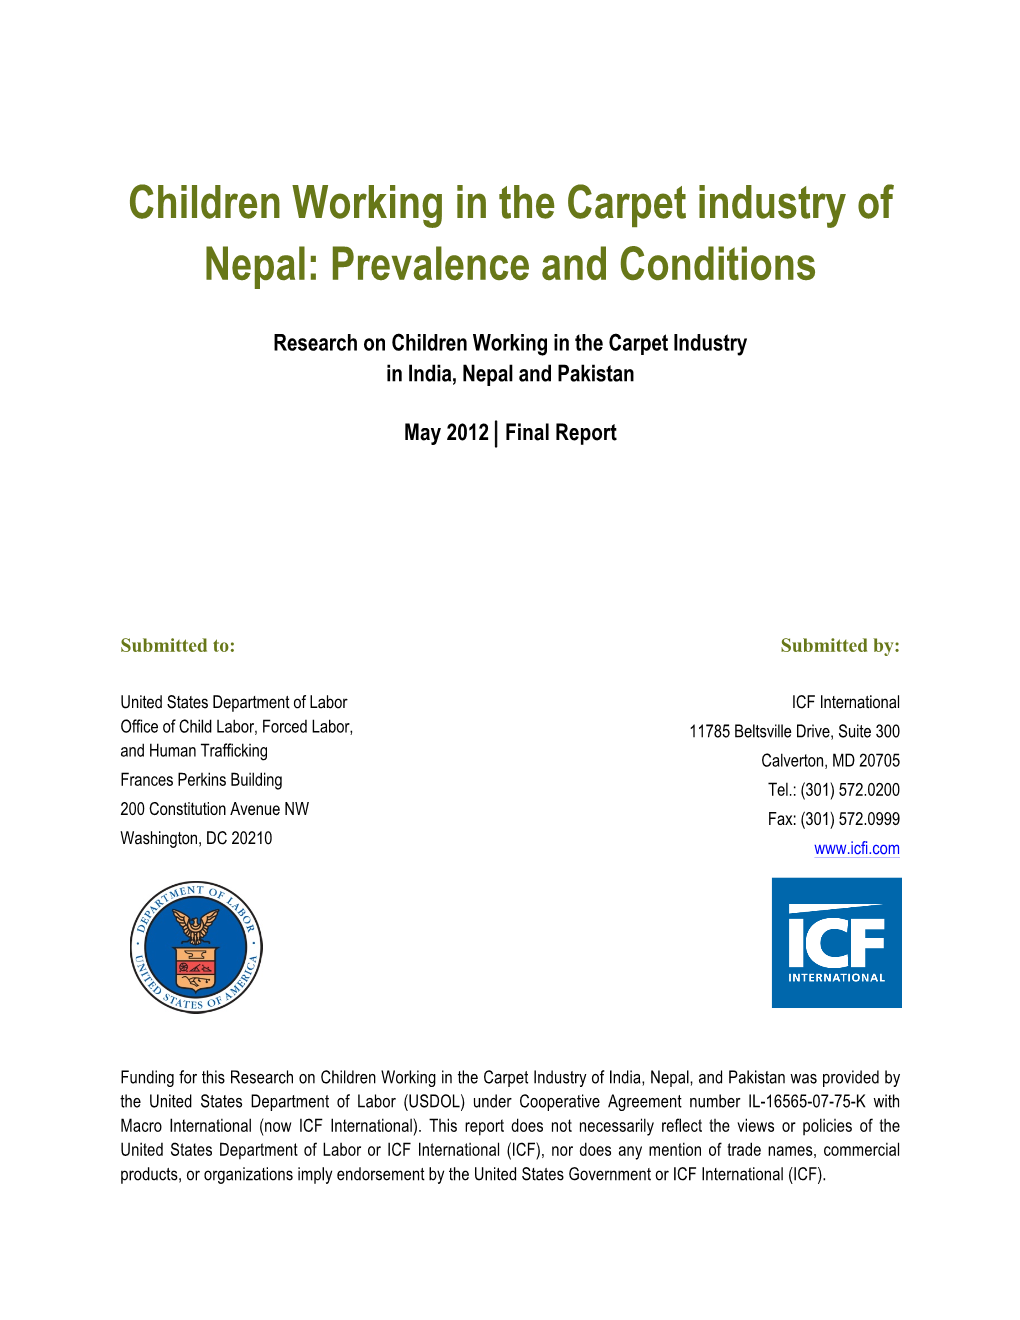 Children Working in the Carpet Industry of Nepal: Prevalence and Conditions